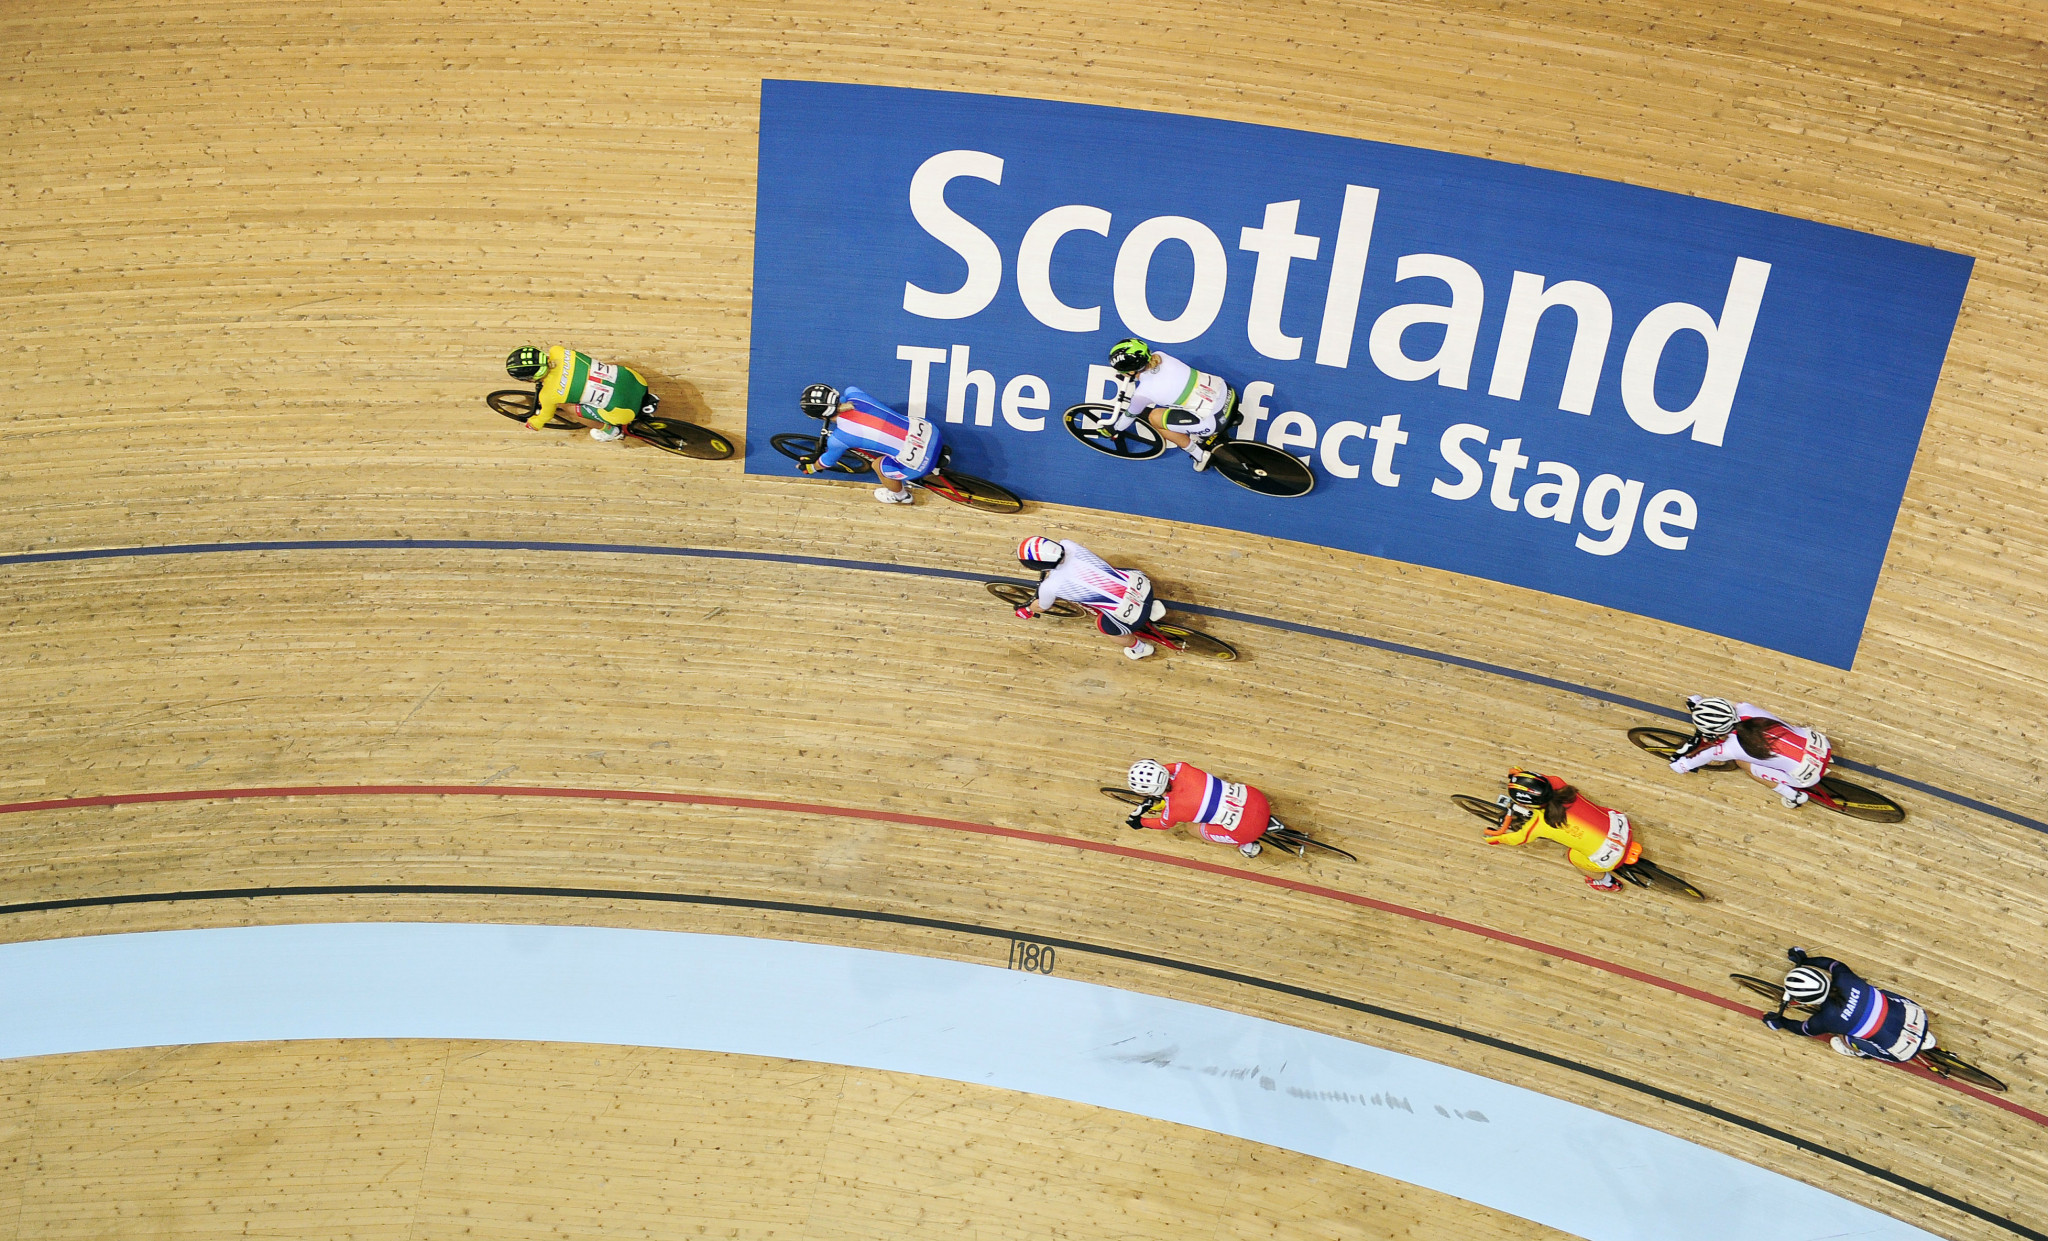 Scotland will host the inaugural combined UCI World Championships in 2023 ©Event Scotland